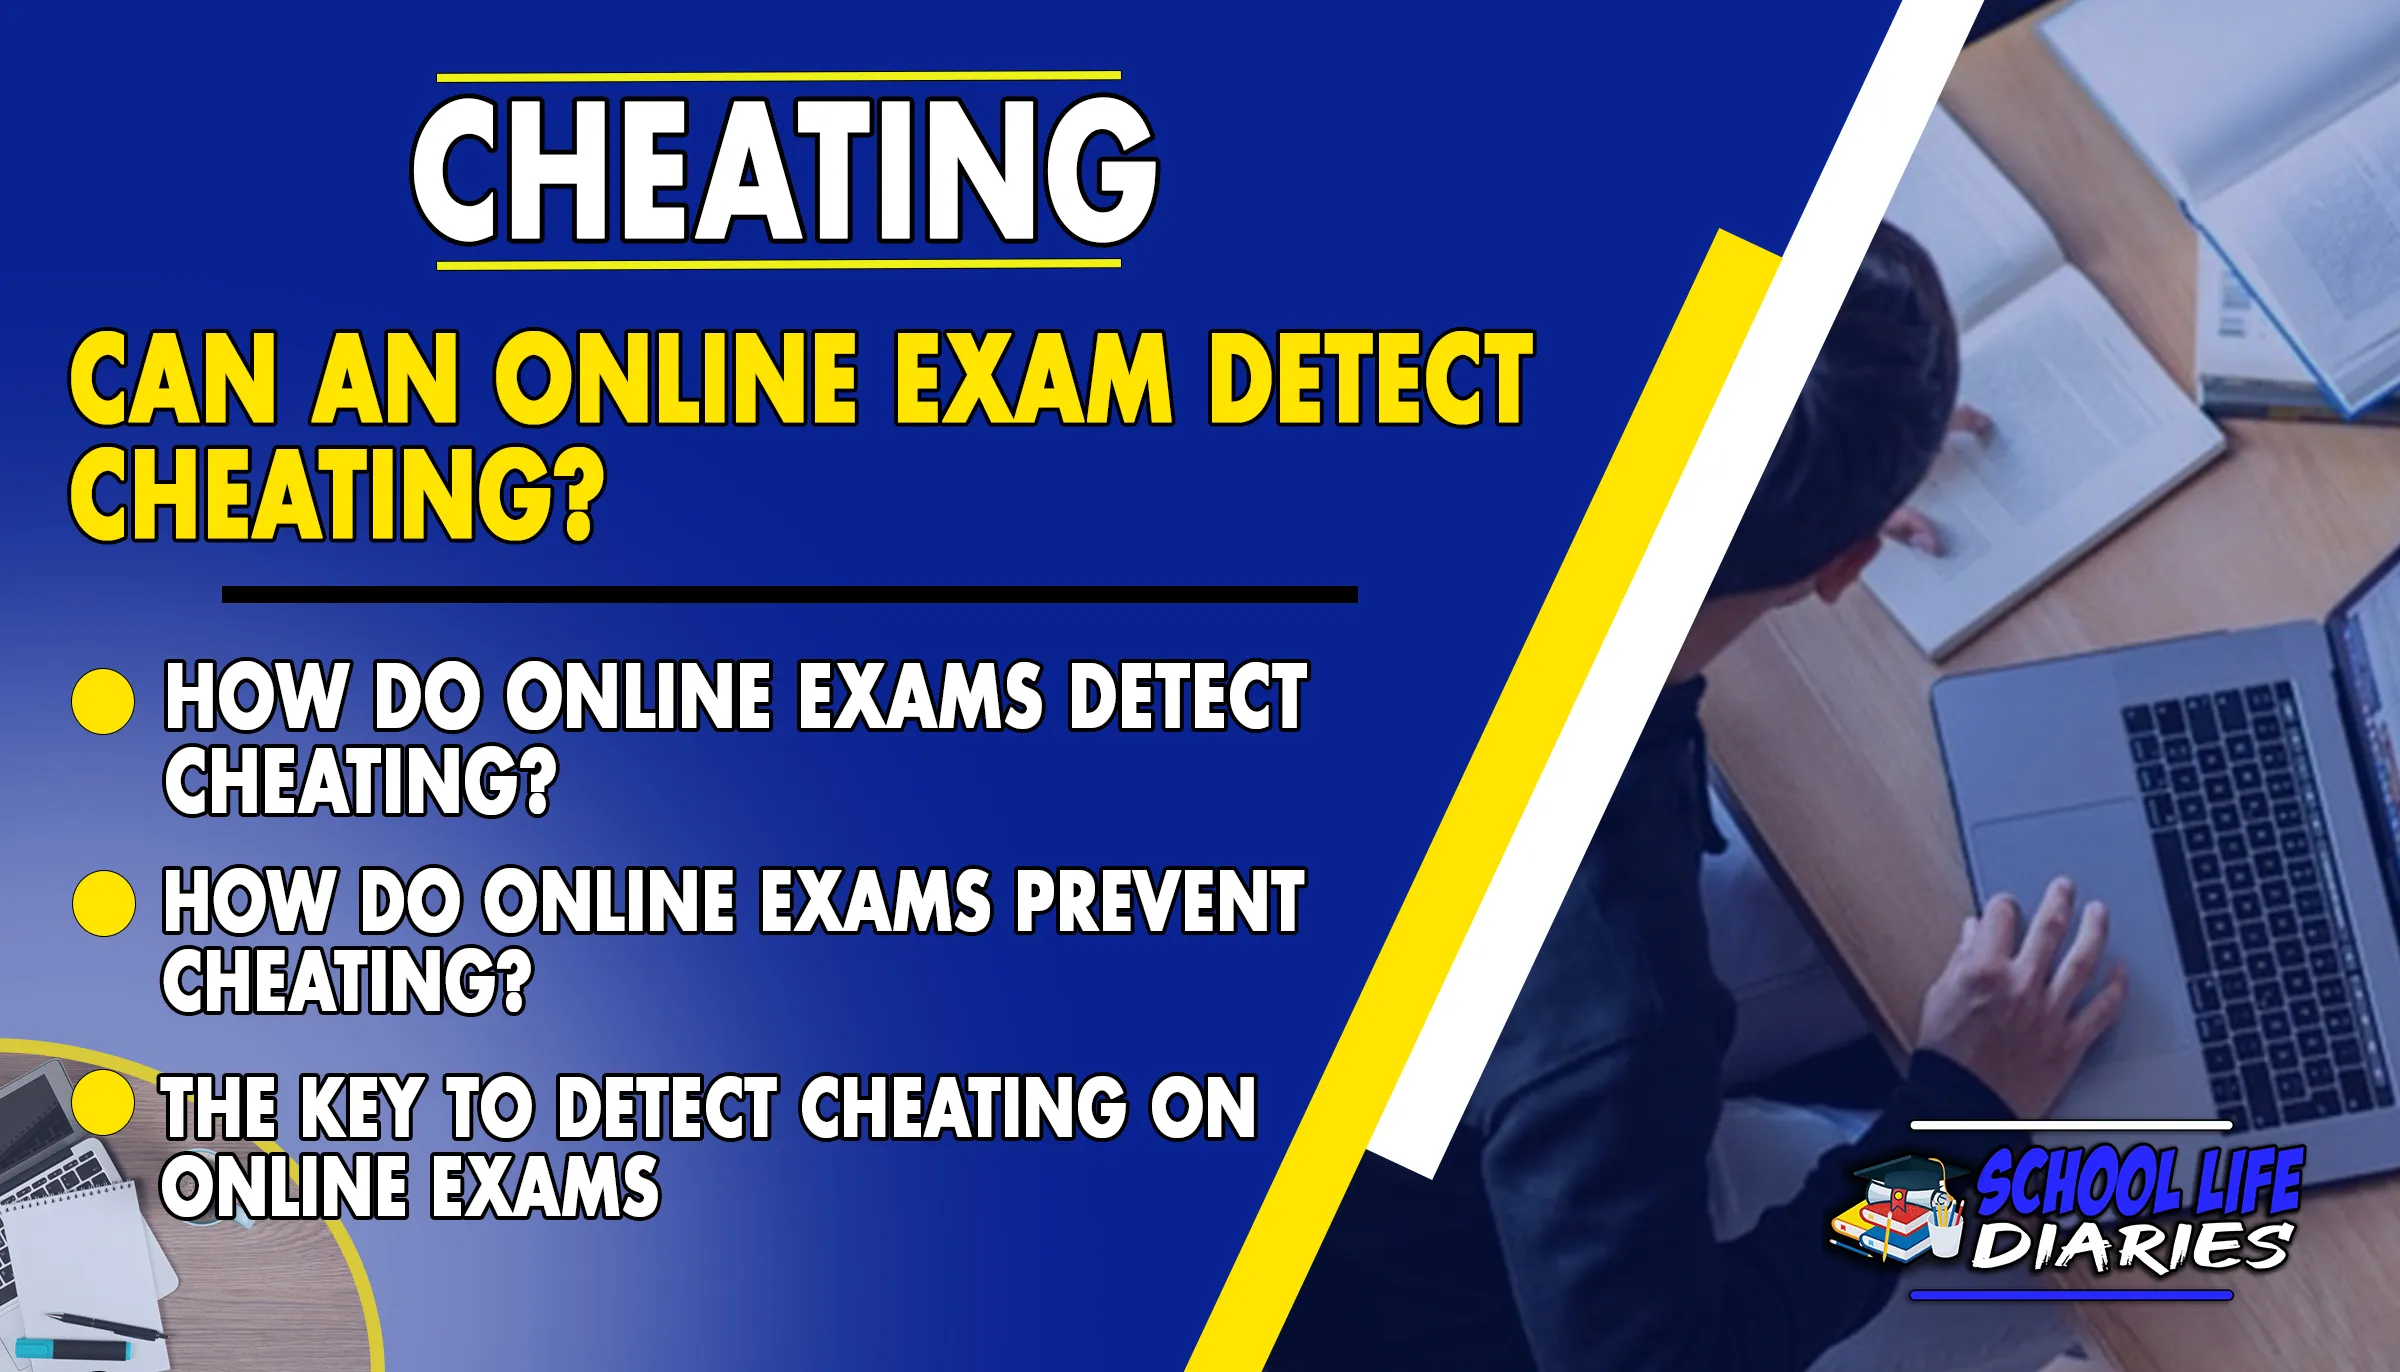 Can an Online Exams Detect Cheating?